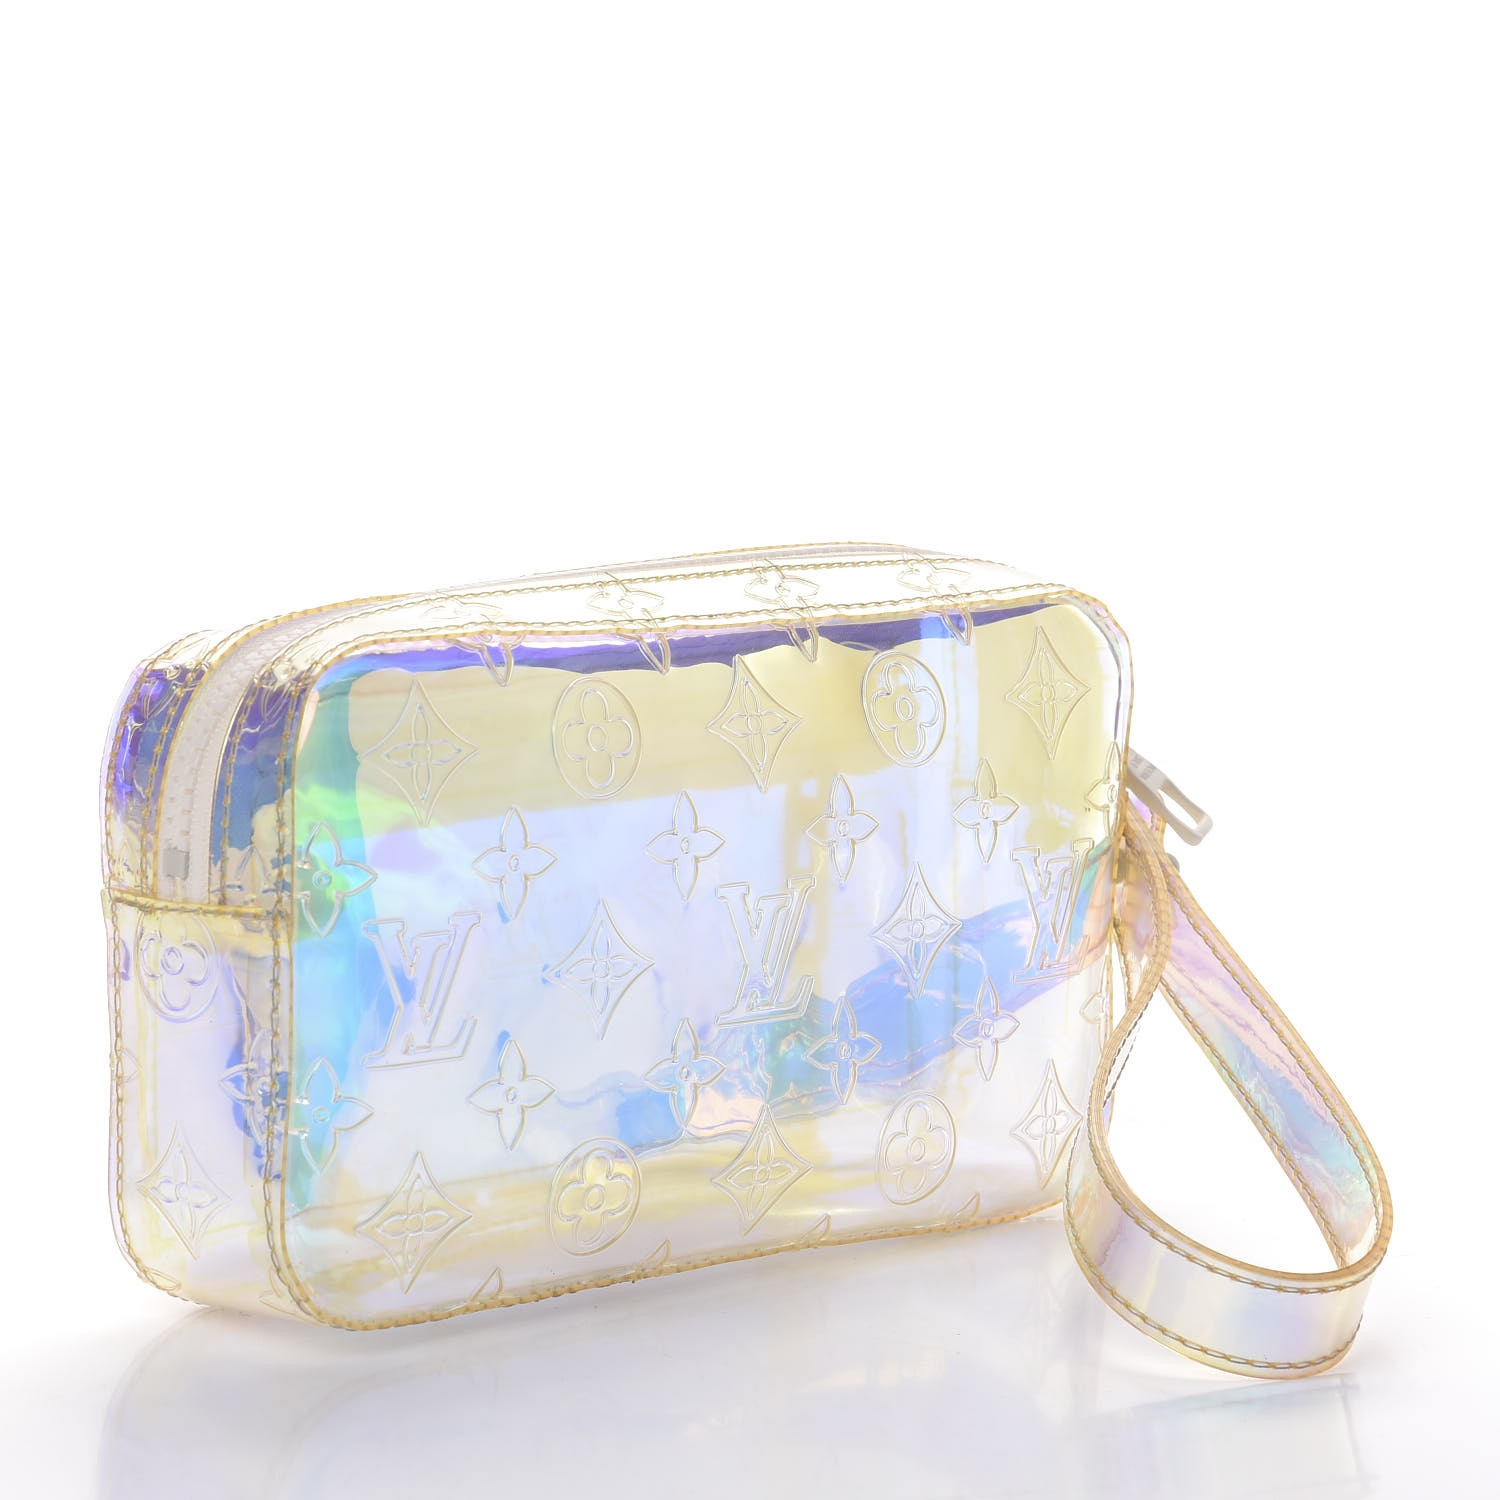 A SET OF THREE: A LIMITED EDITION IRIDESCENT PRISM MONOGRAM